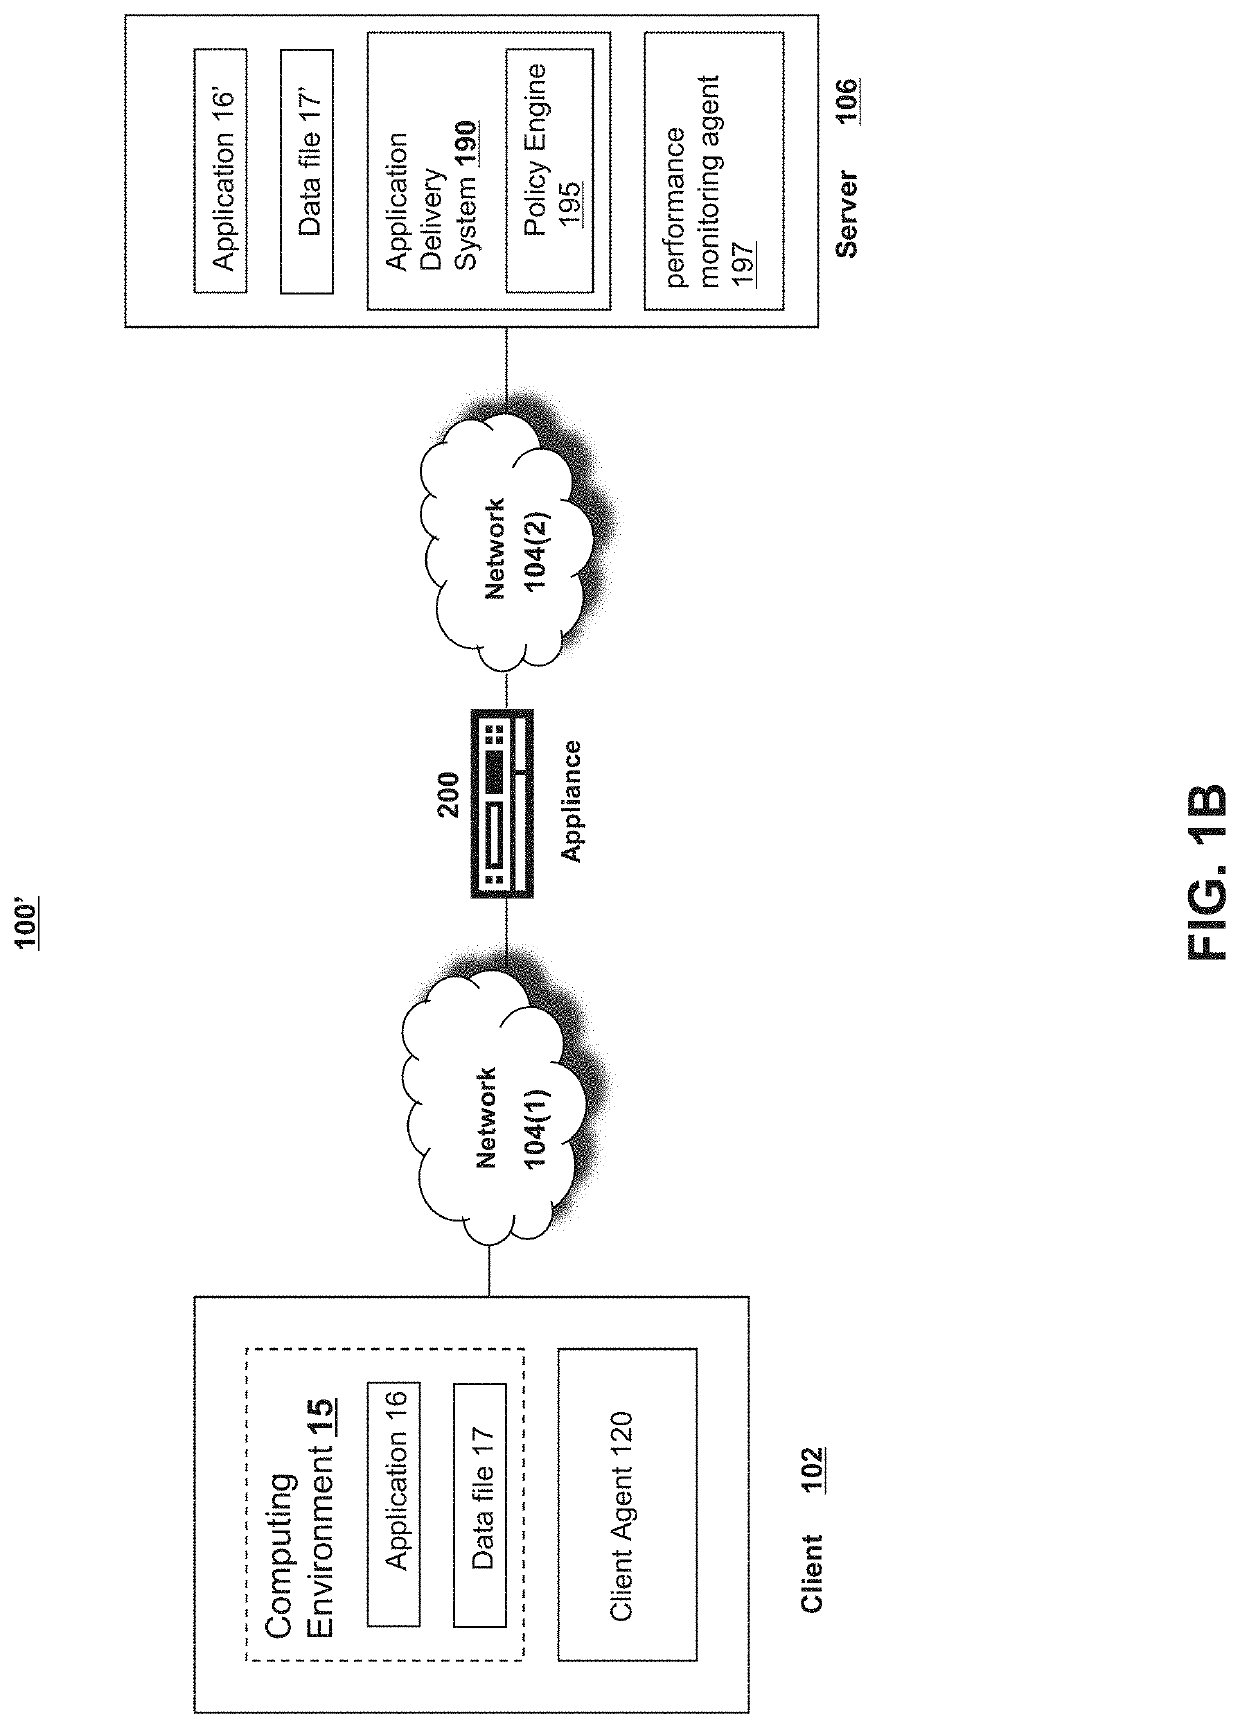 Method for optimal path selection for data traffic undergoing high processing or queuing delay